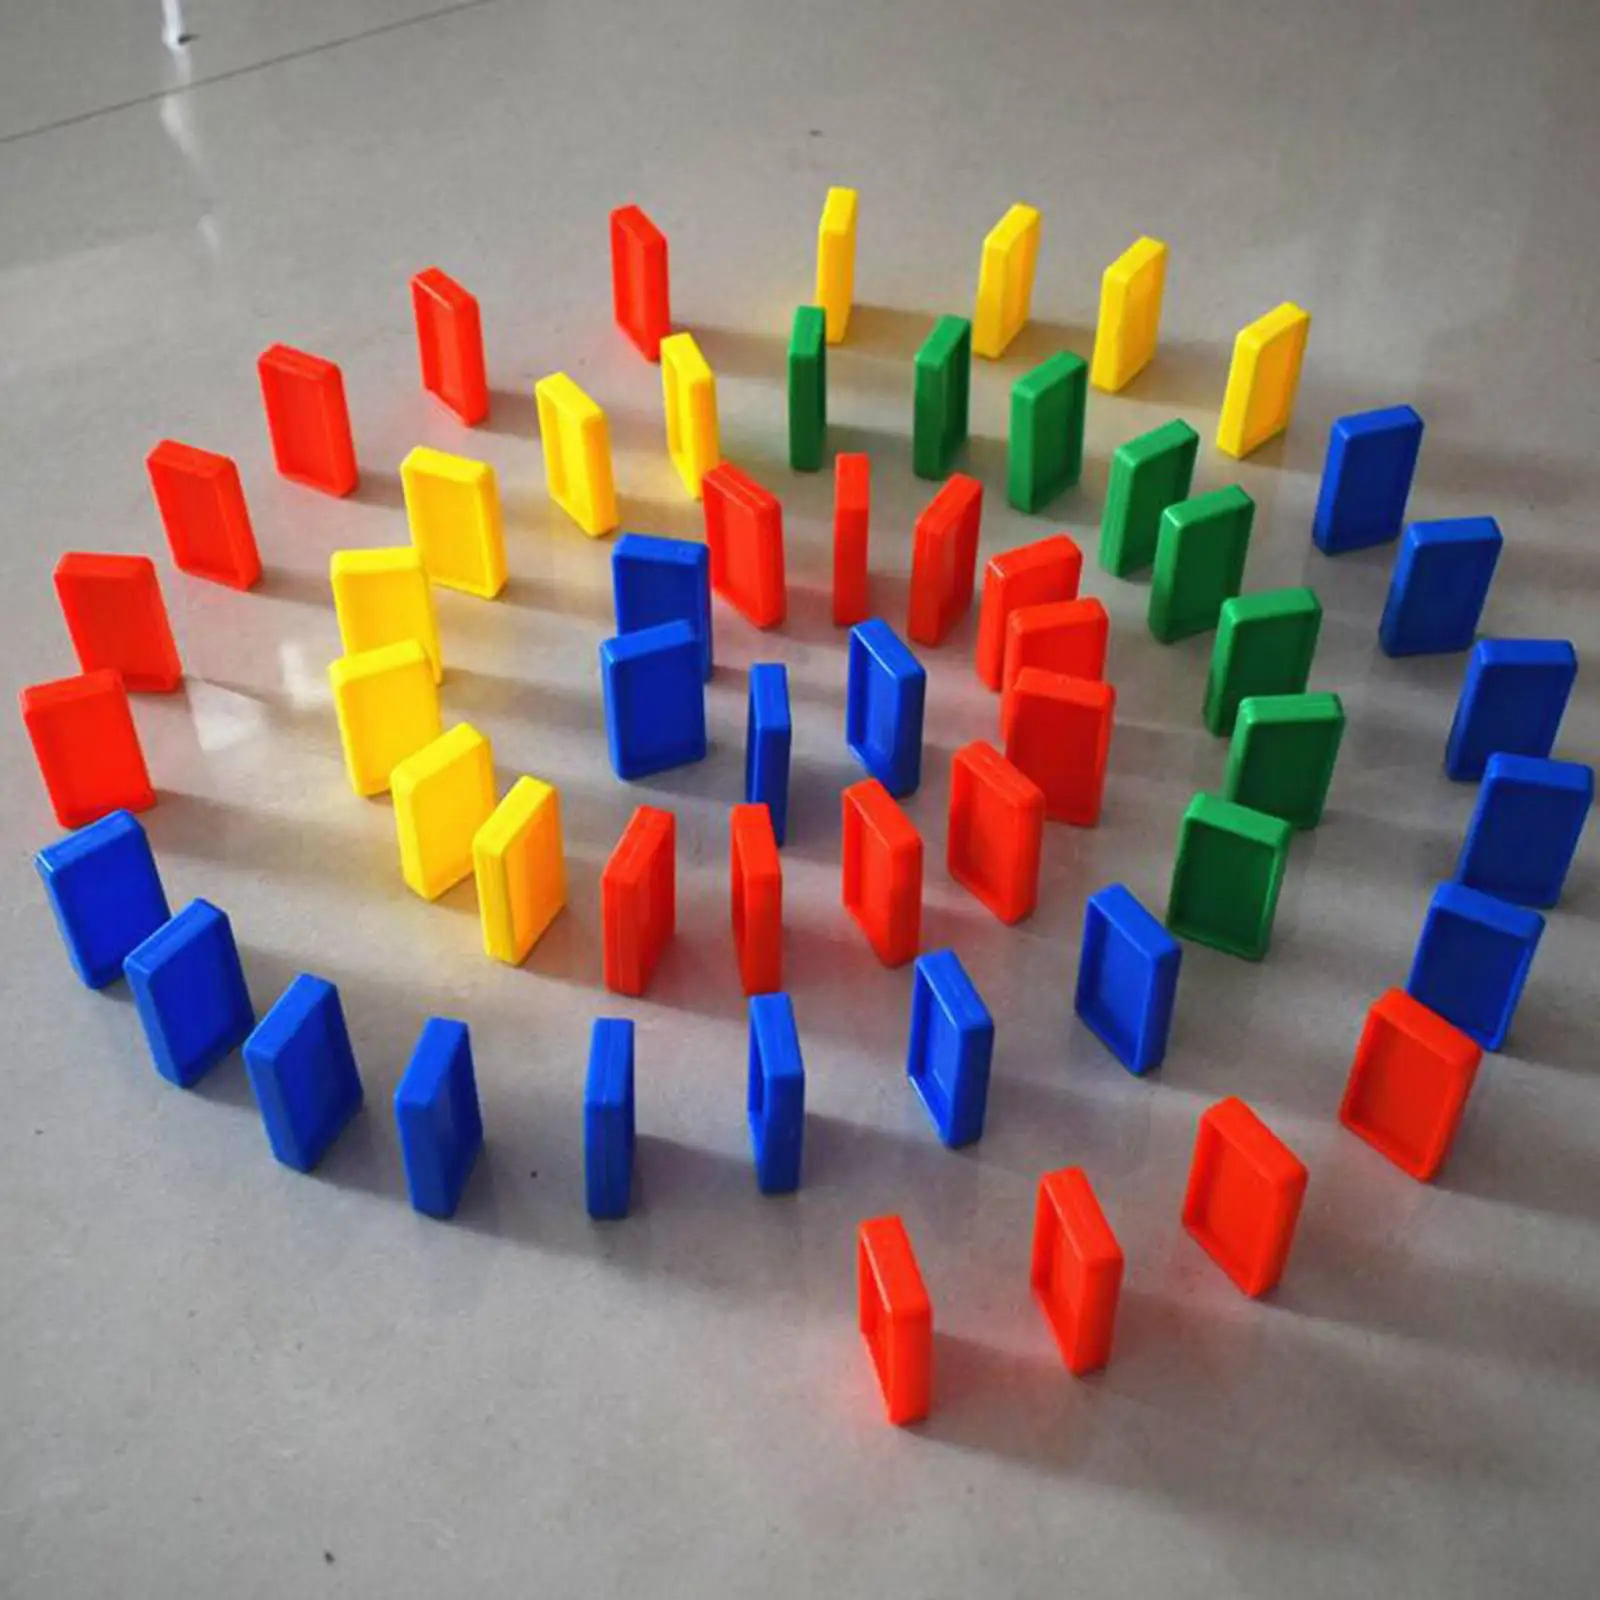 100x Dominoes Train Blocks Set Building Educational Play Toy for Children Girls Boys Creative Gifts